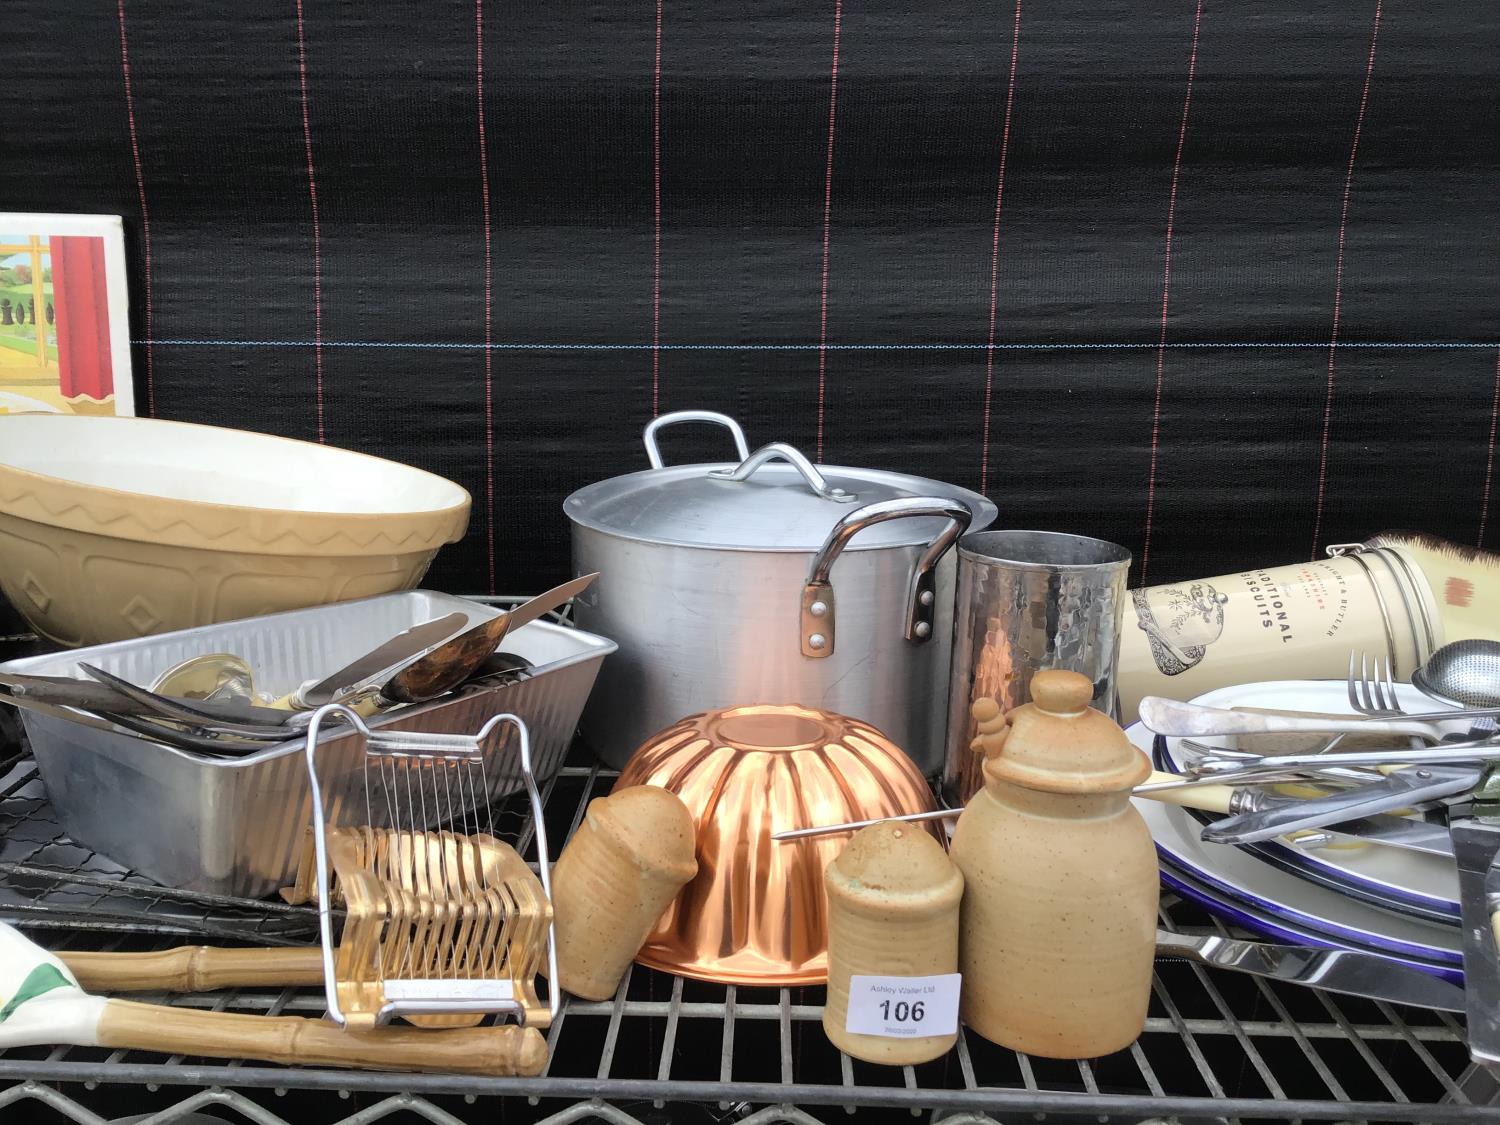 A QUANTITY OF KITCHEN RELATED ITEMS TO INCLUDE STAINLESS STEELWARE, FLATWARE, DISHES, BOWLS, PANS, , - Image 3 of 4